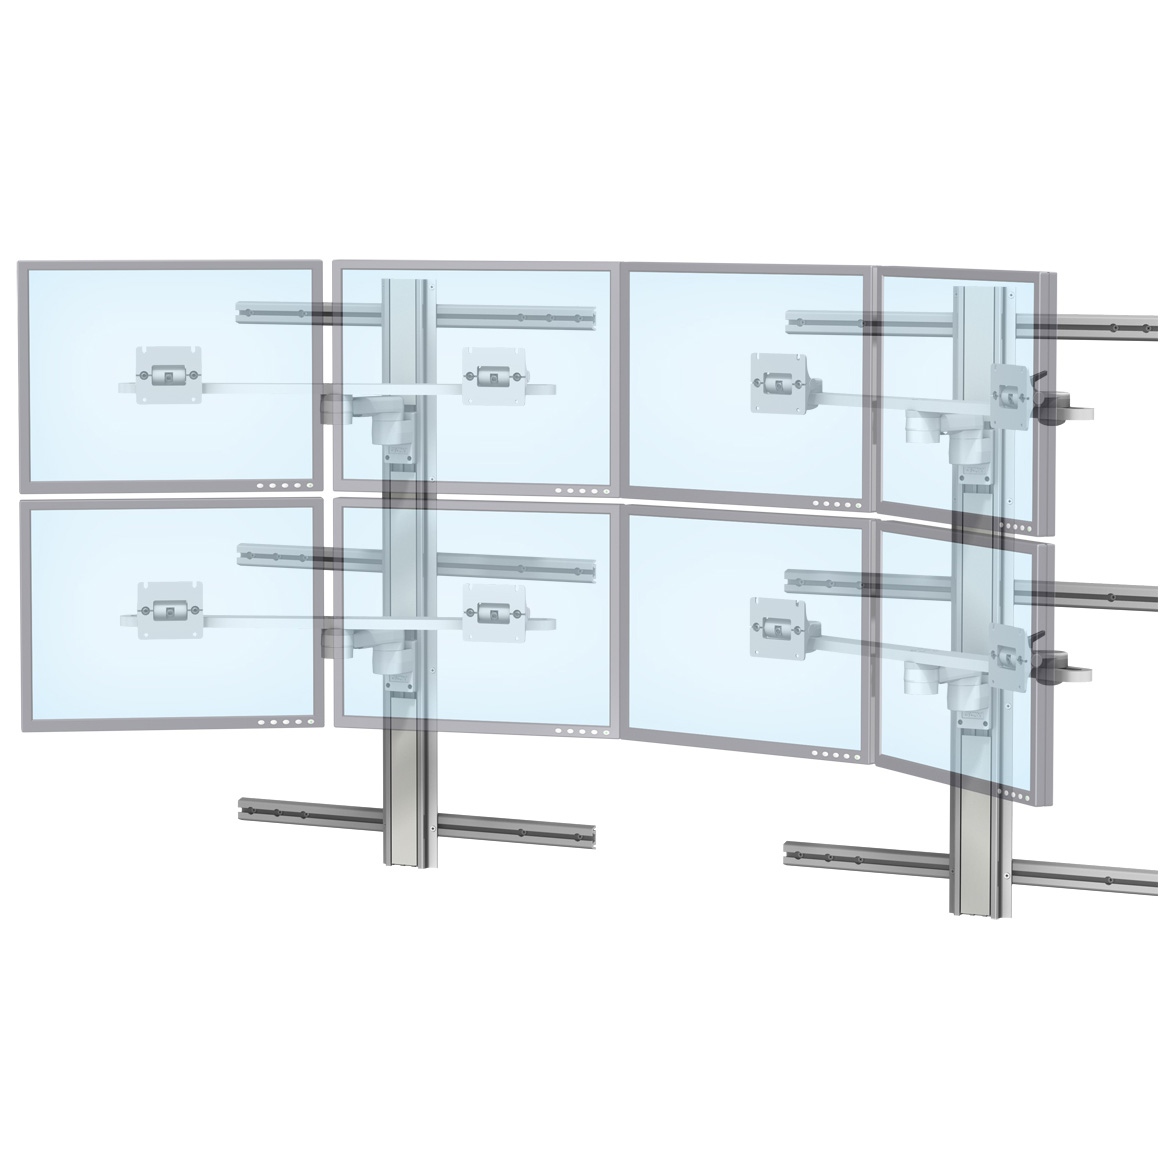 8 Display Dual Bar8in Arm2 Channel Horizontal Sliders Technical Web